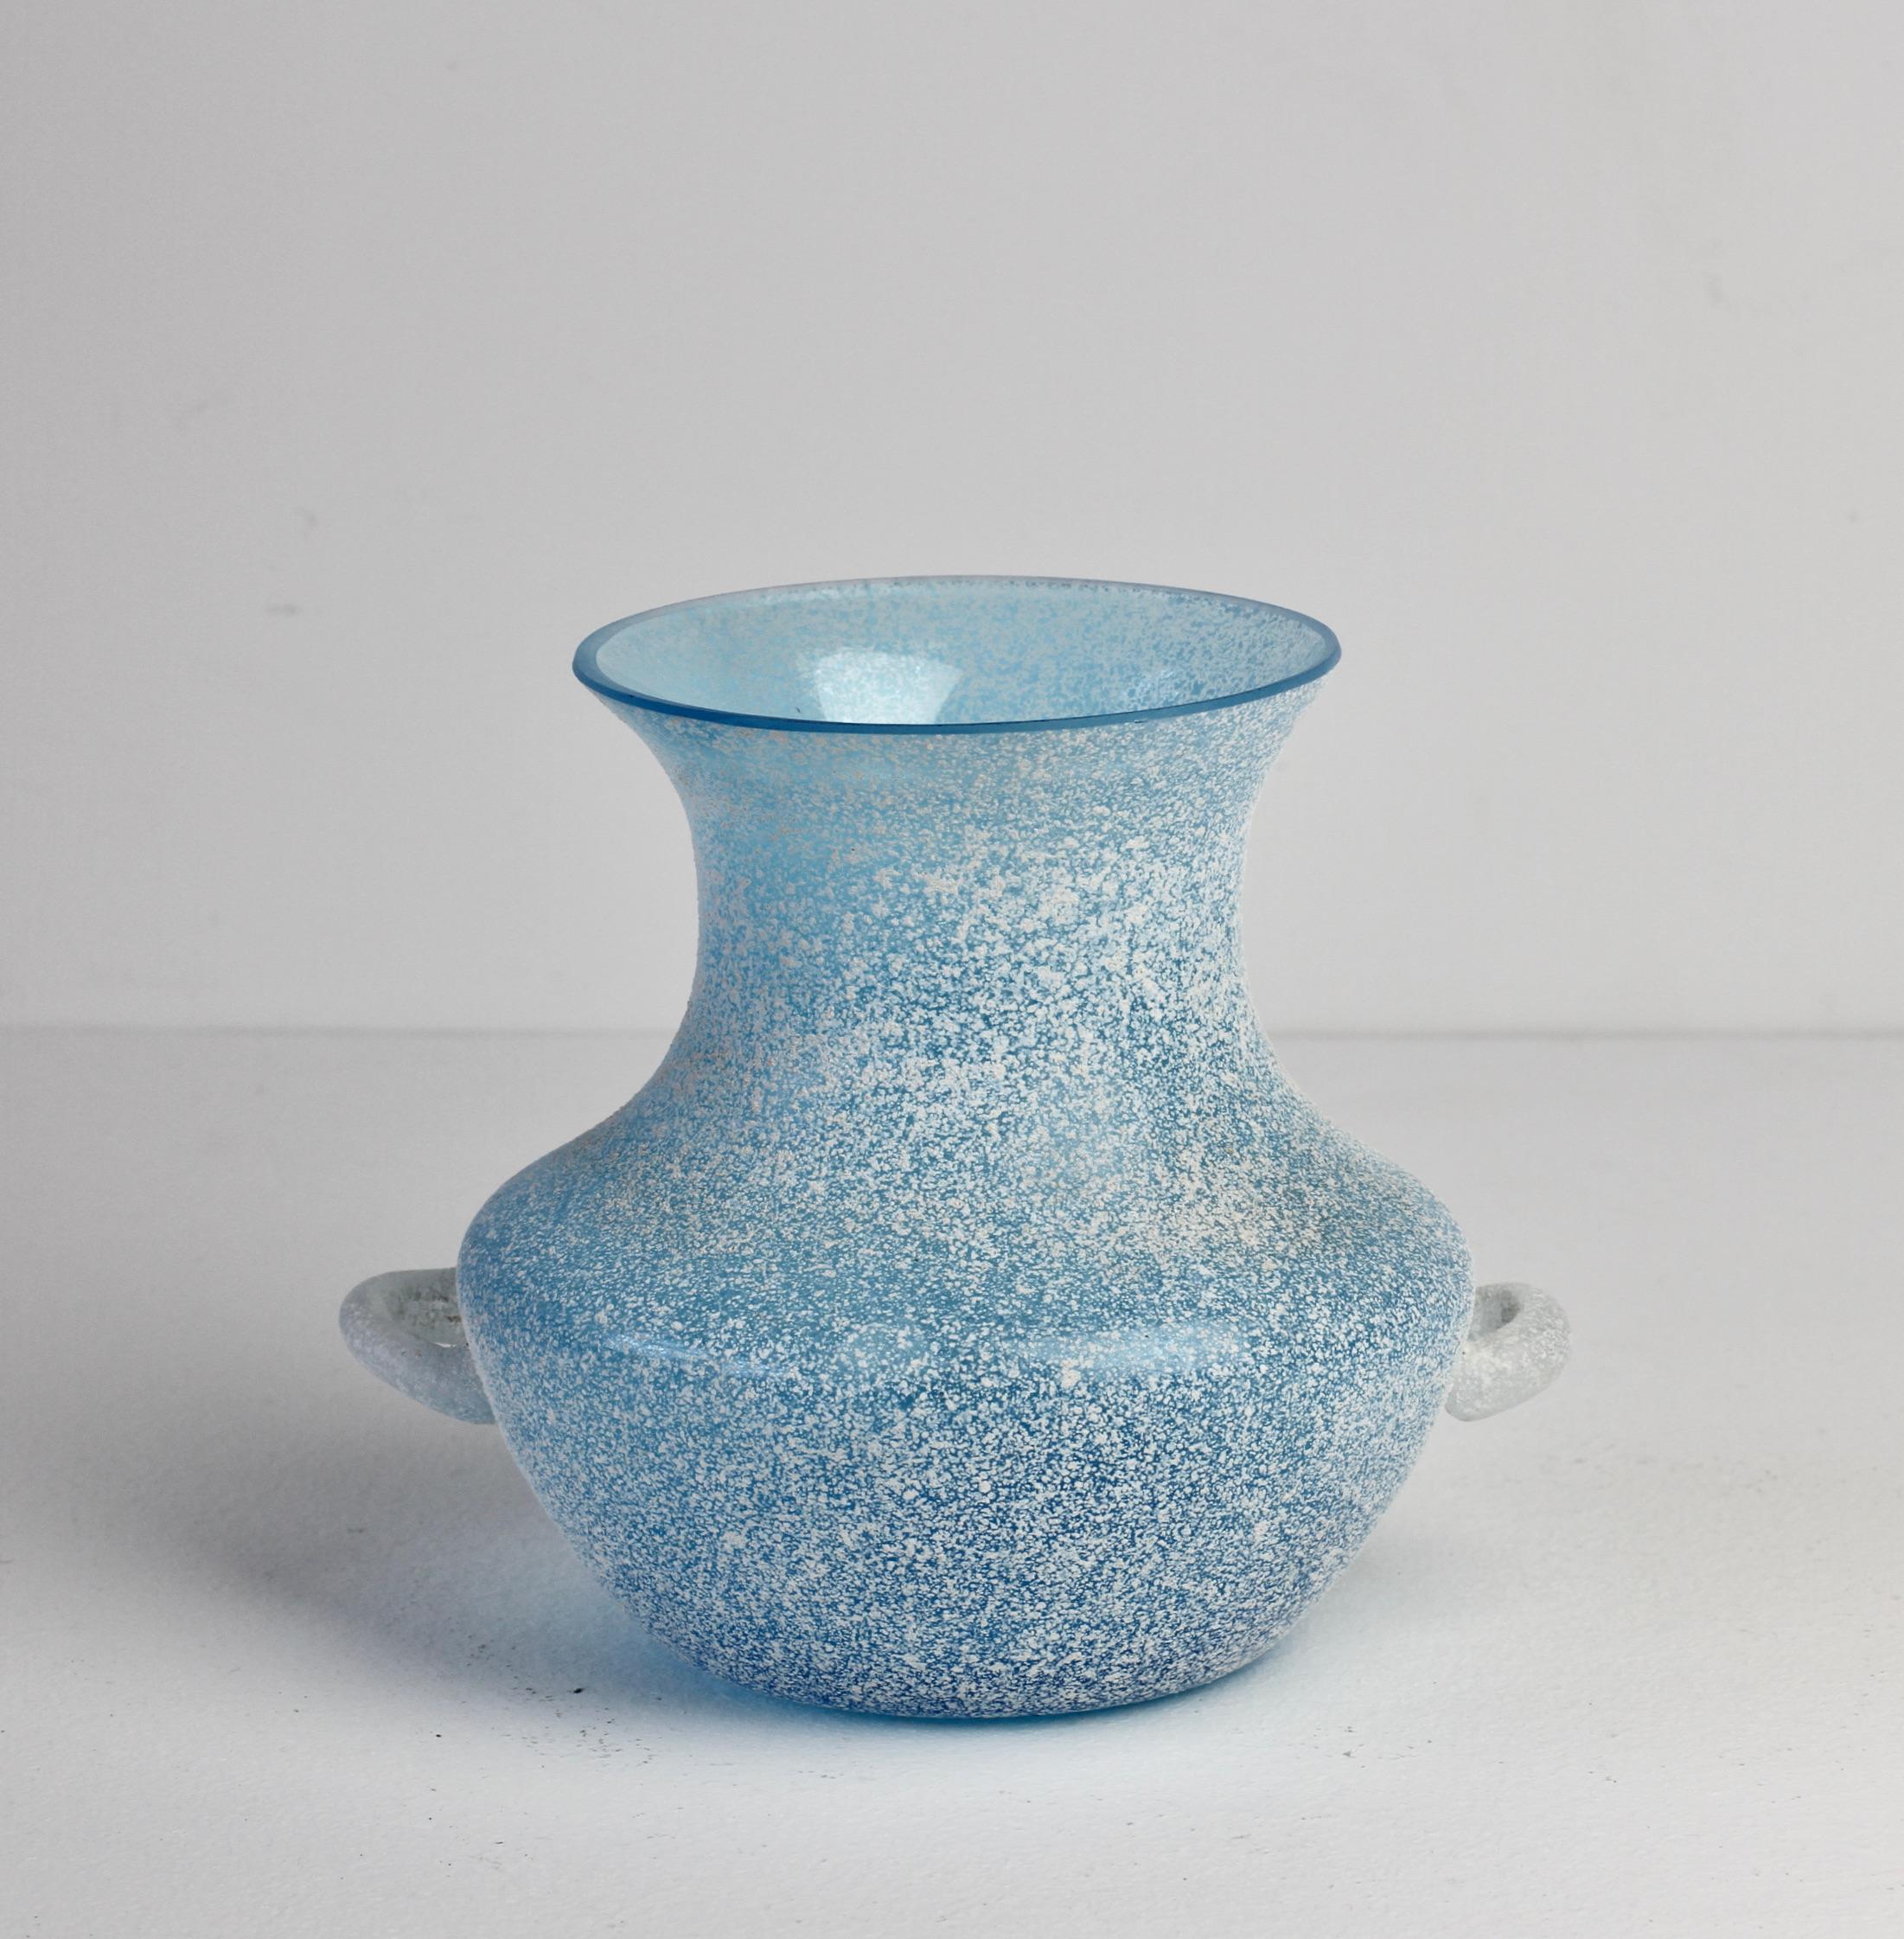 Textured 'a Scavo' blue colored / coloured glass vase with handles by Seguso Vetri d'Arte Murano, Italy, circa late 1980s. Elegant with its curved and rounded form and showing extraordinary craftsmanship with the use of the 'Scavo' technique to